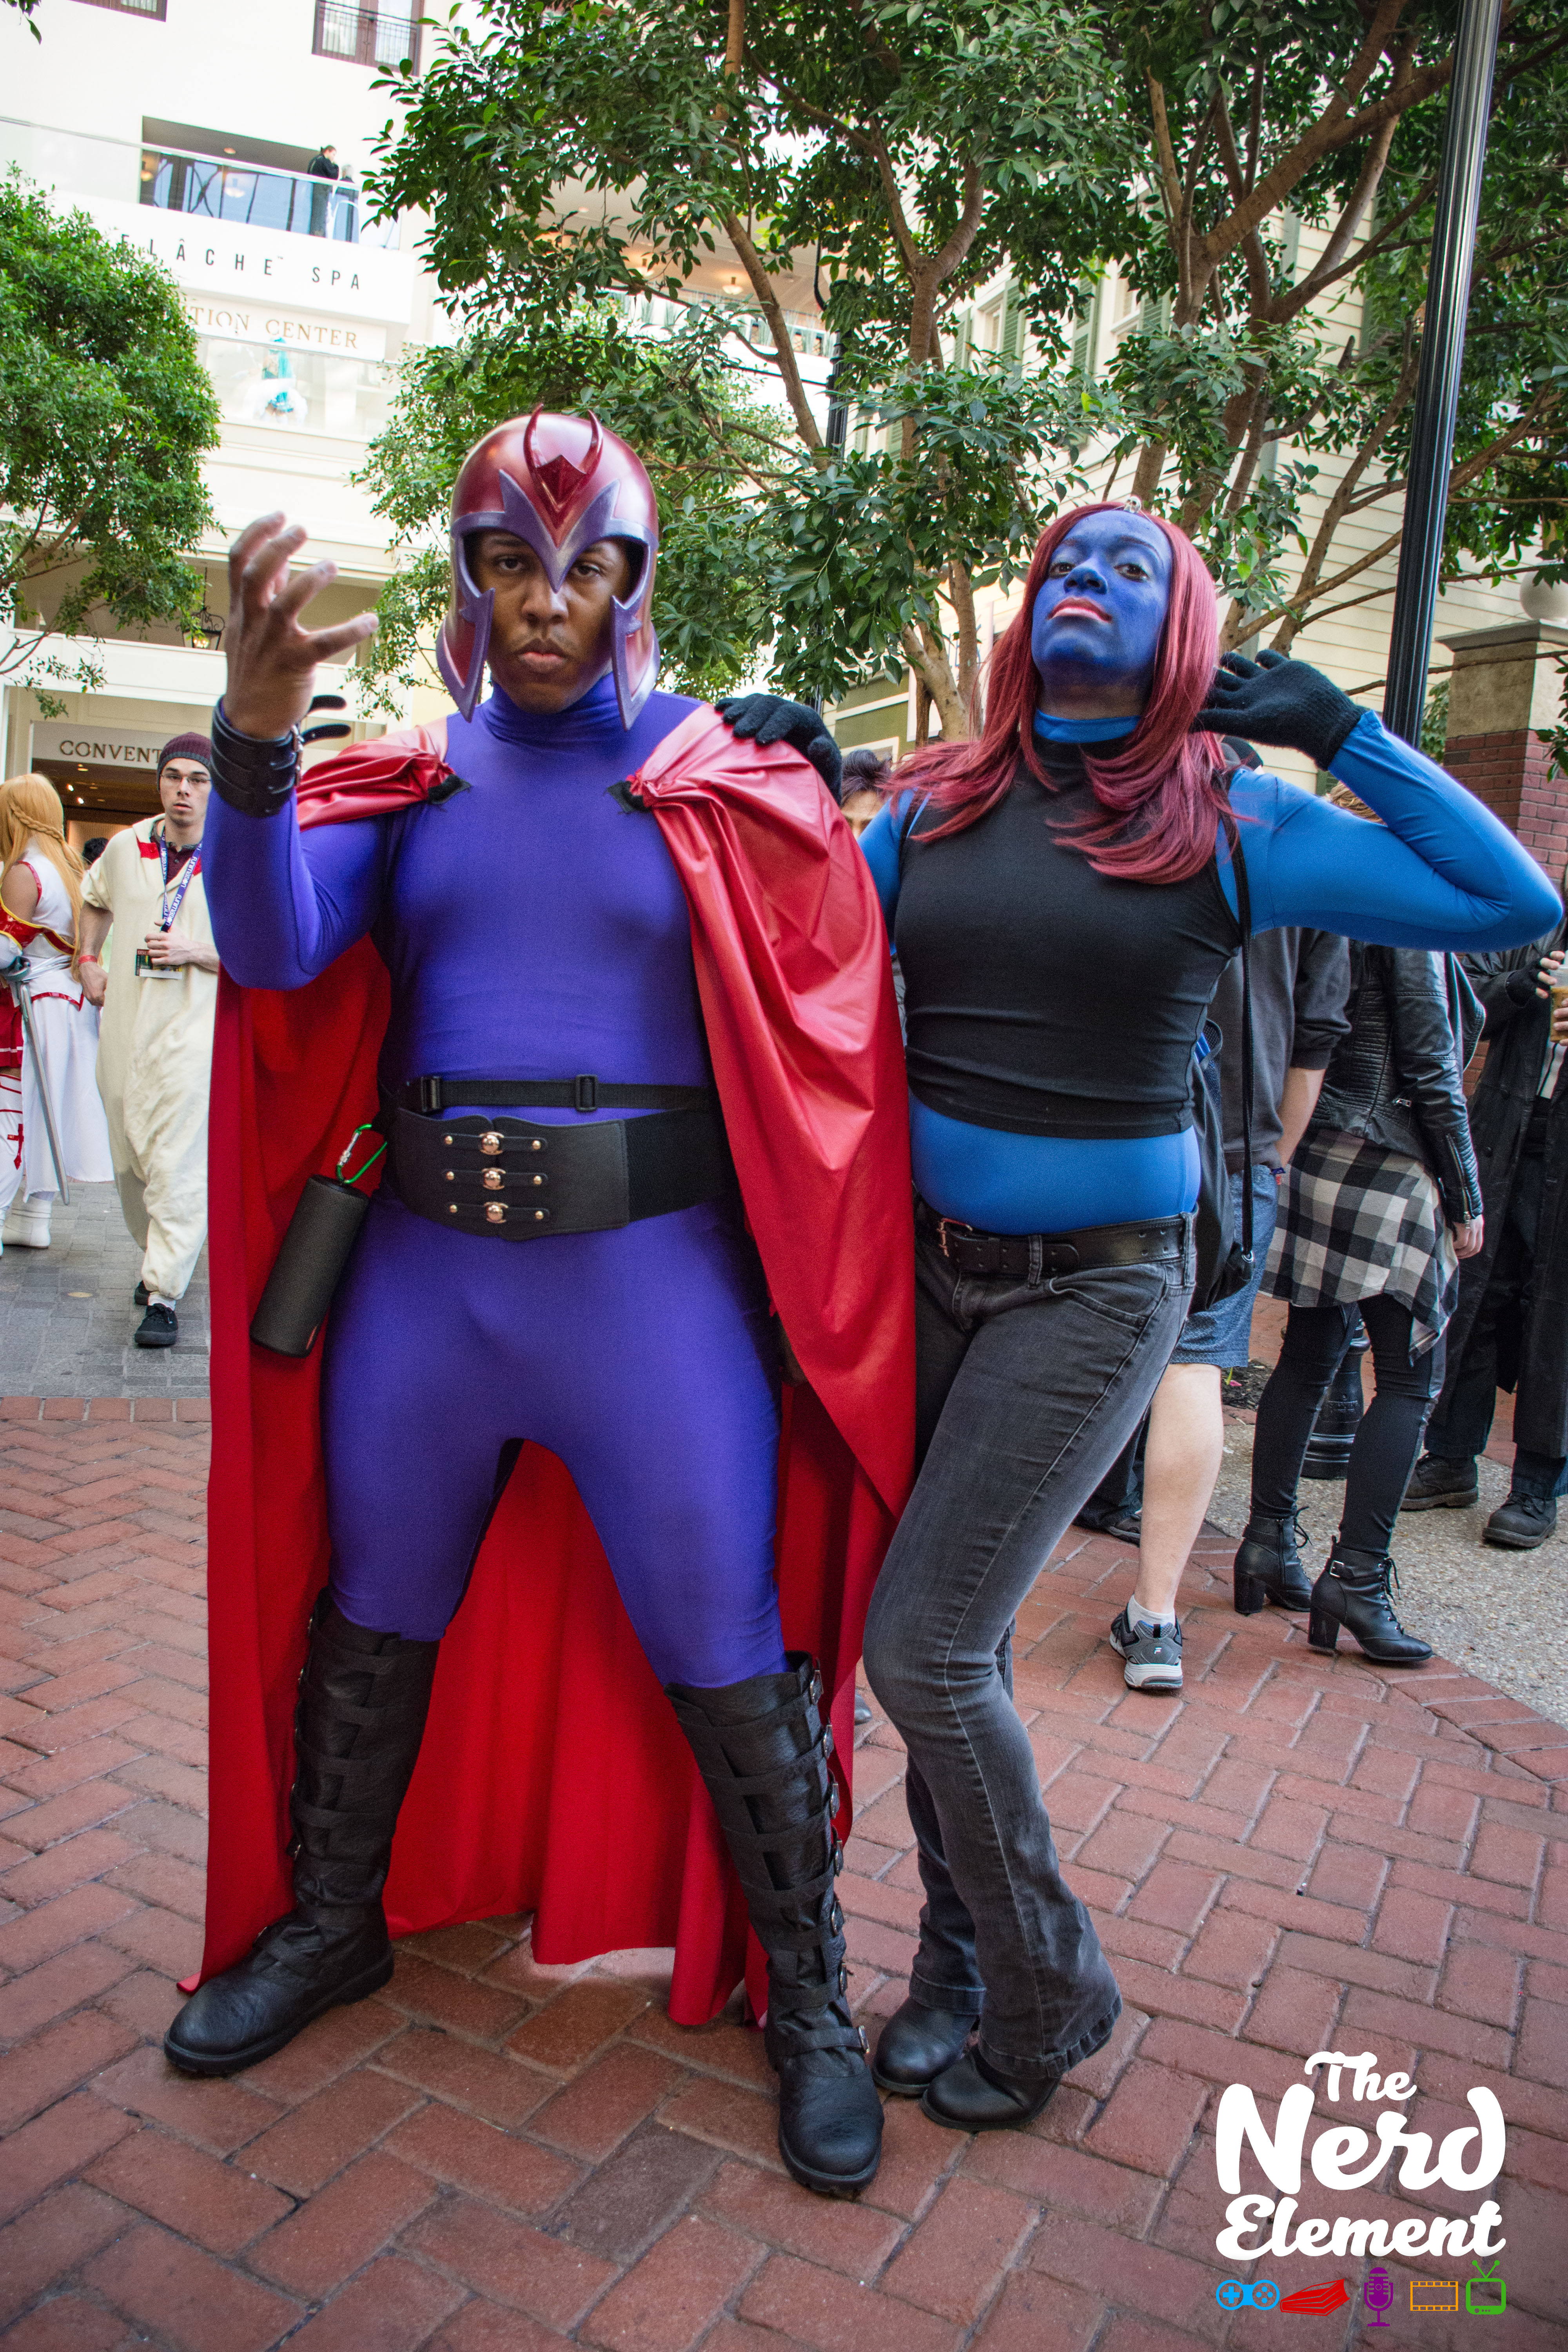 Magneto and Mystique
Cosplayers: @dgcollins28 and @mikettedw